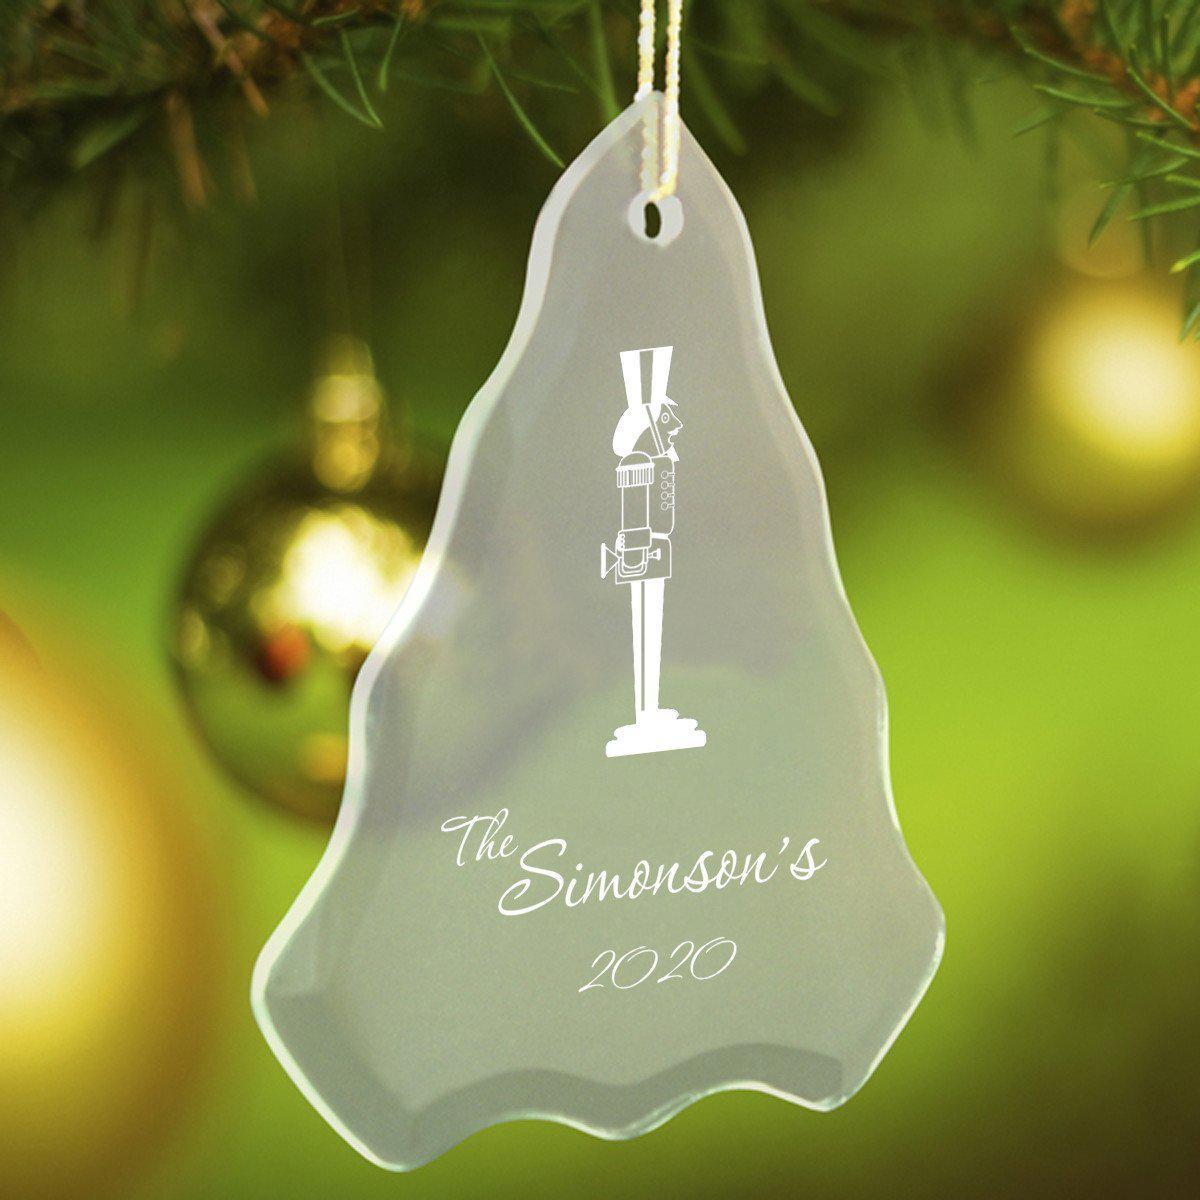 Personalized Tree Shaped Glass Ornaments - Christmas Ornaments